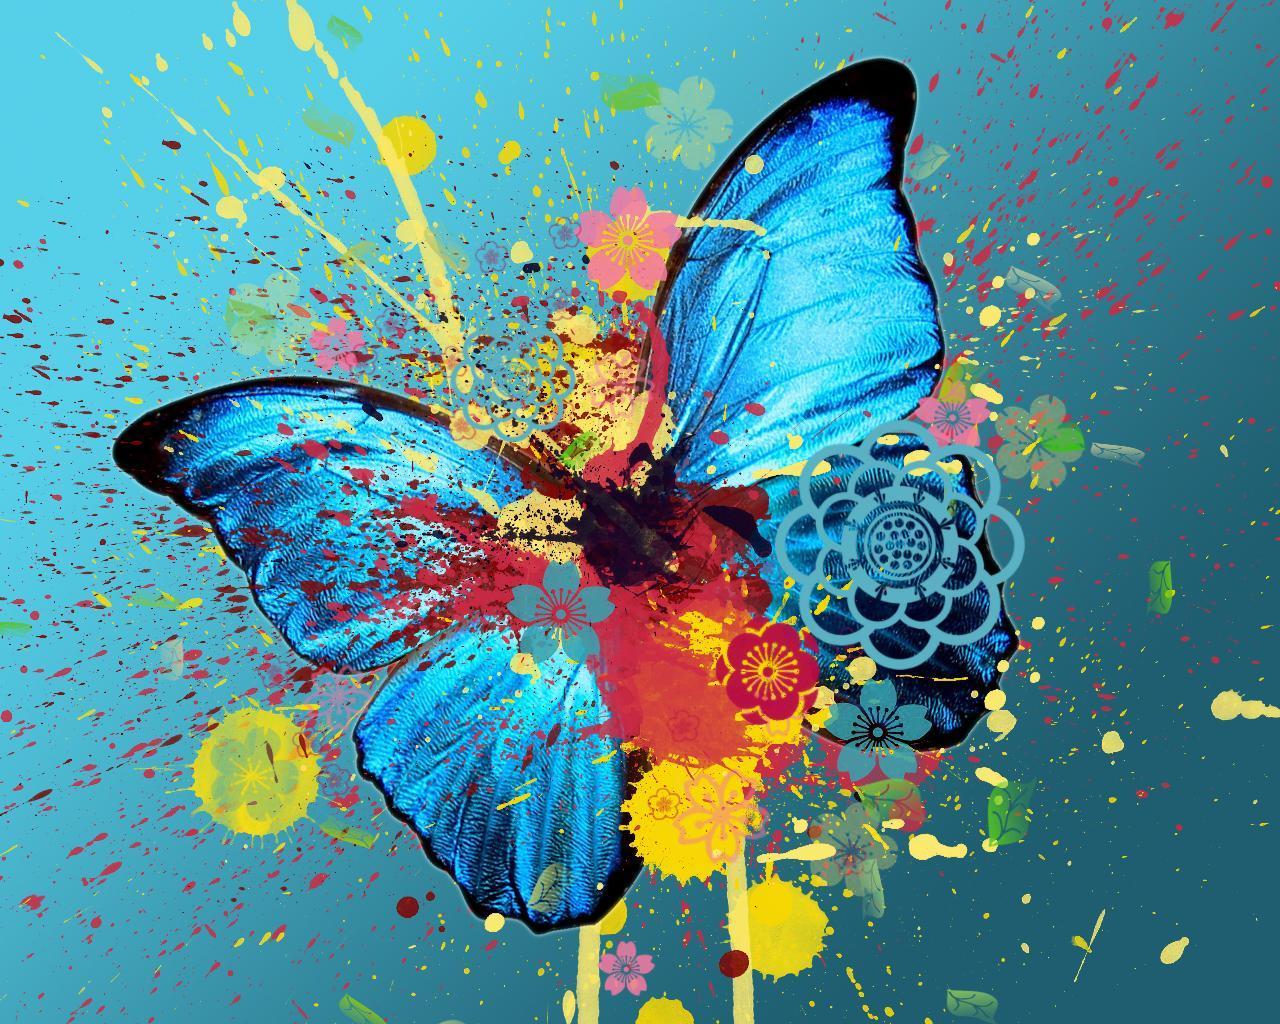 butterfly - Art and Pictures! Wallpaper (21988863) - Fanpop